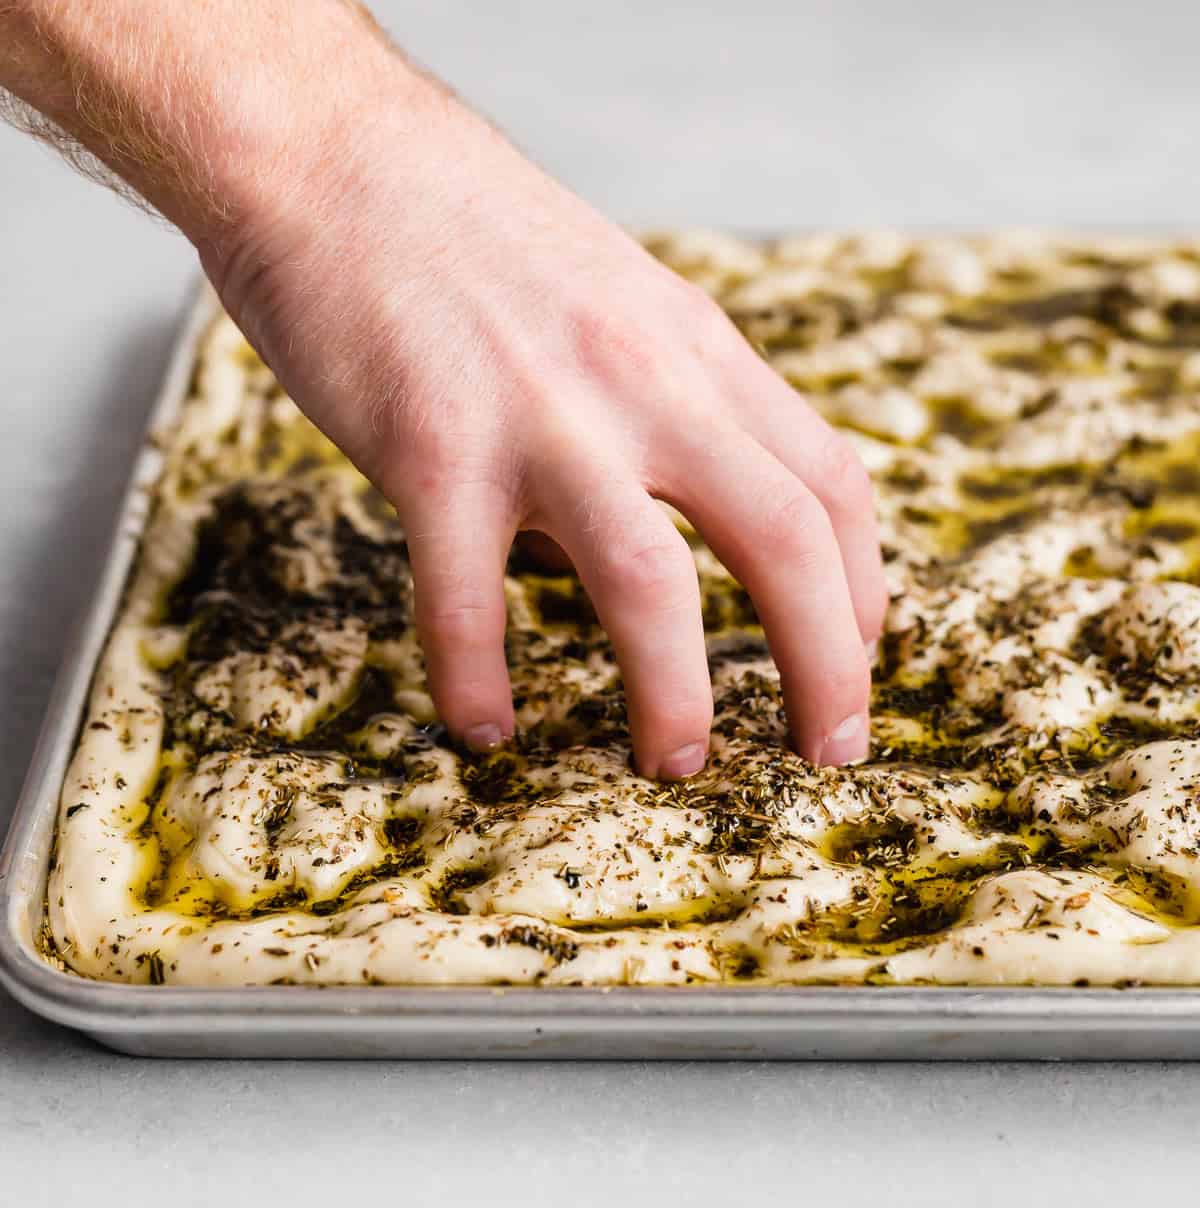 A hand pressing five fingers down into focaccia bread dough that's been topped with herb oil.